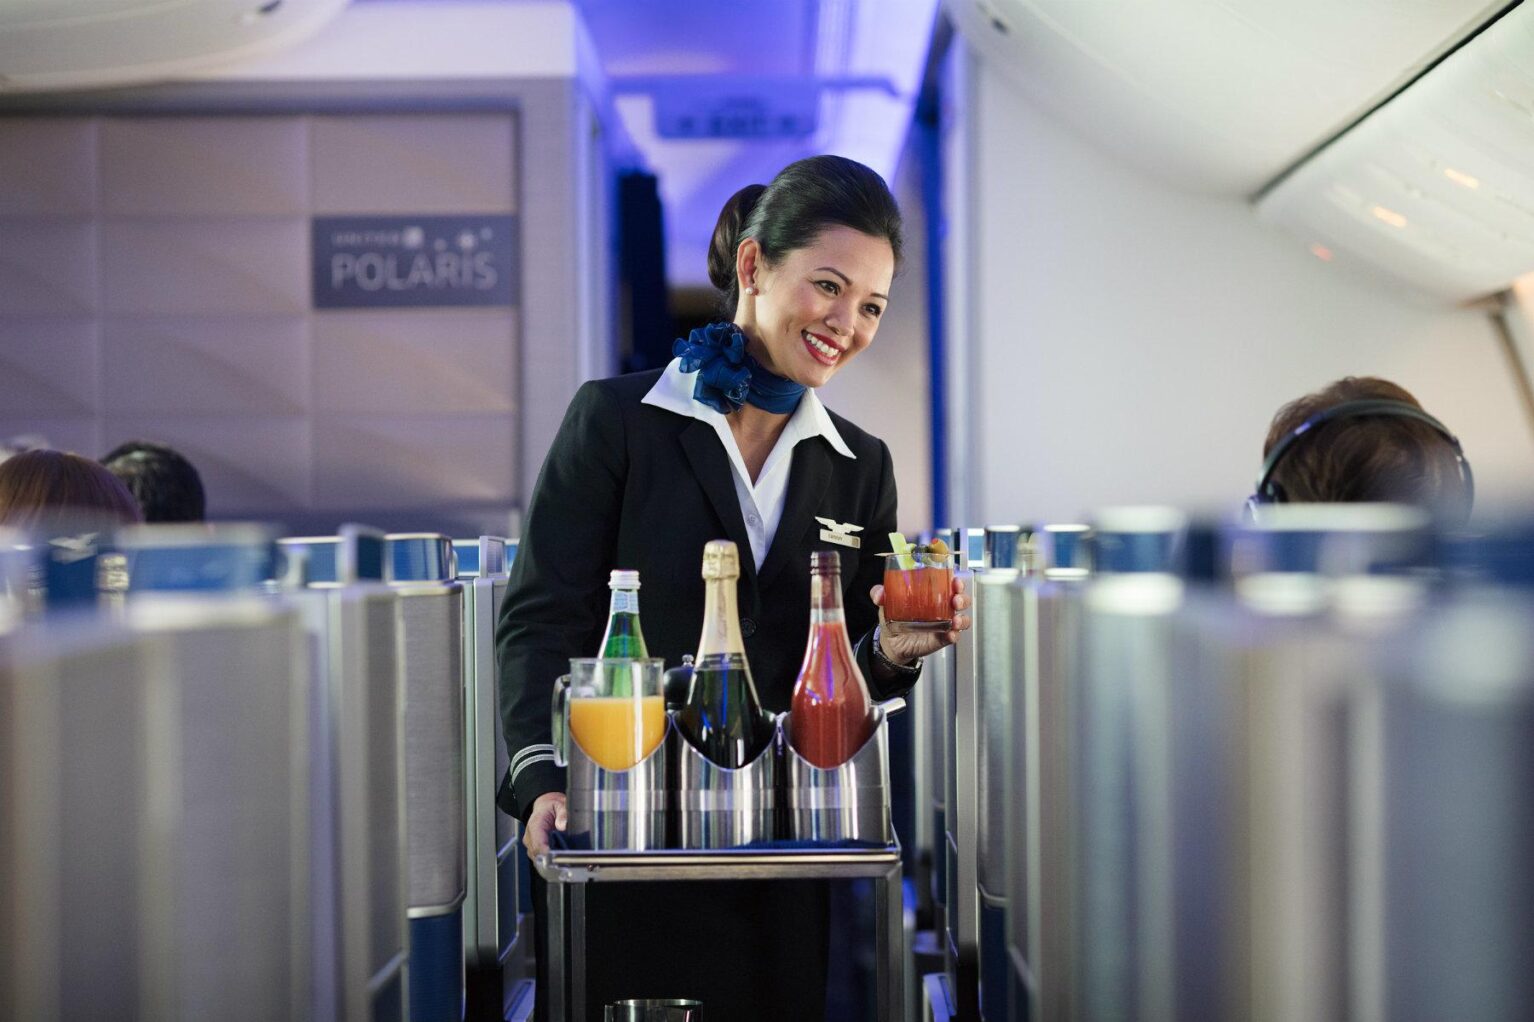 The cabin staff onboard United Polaris